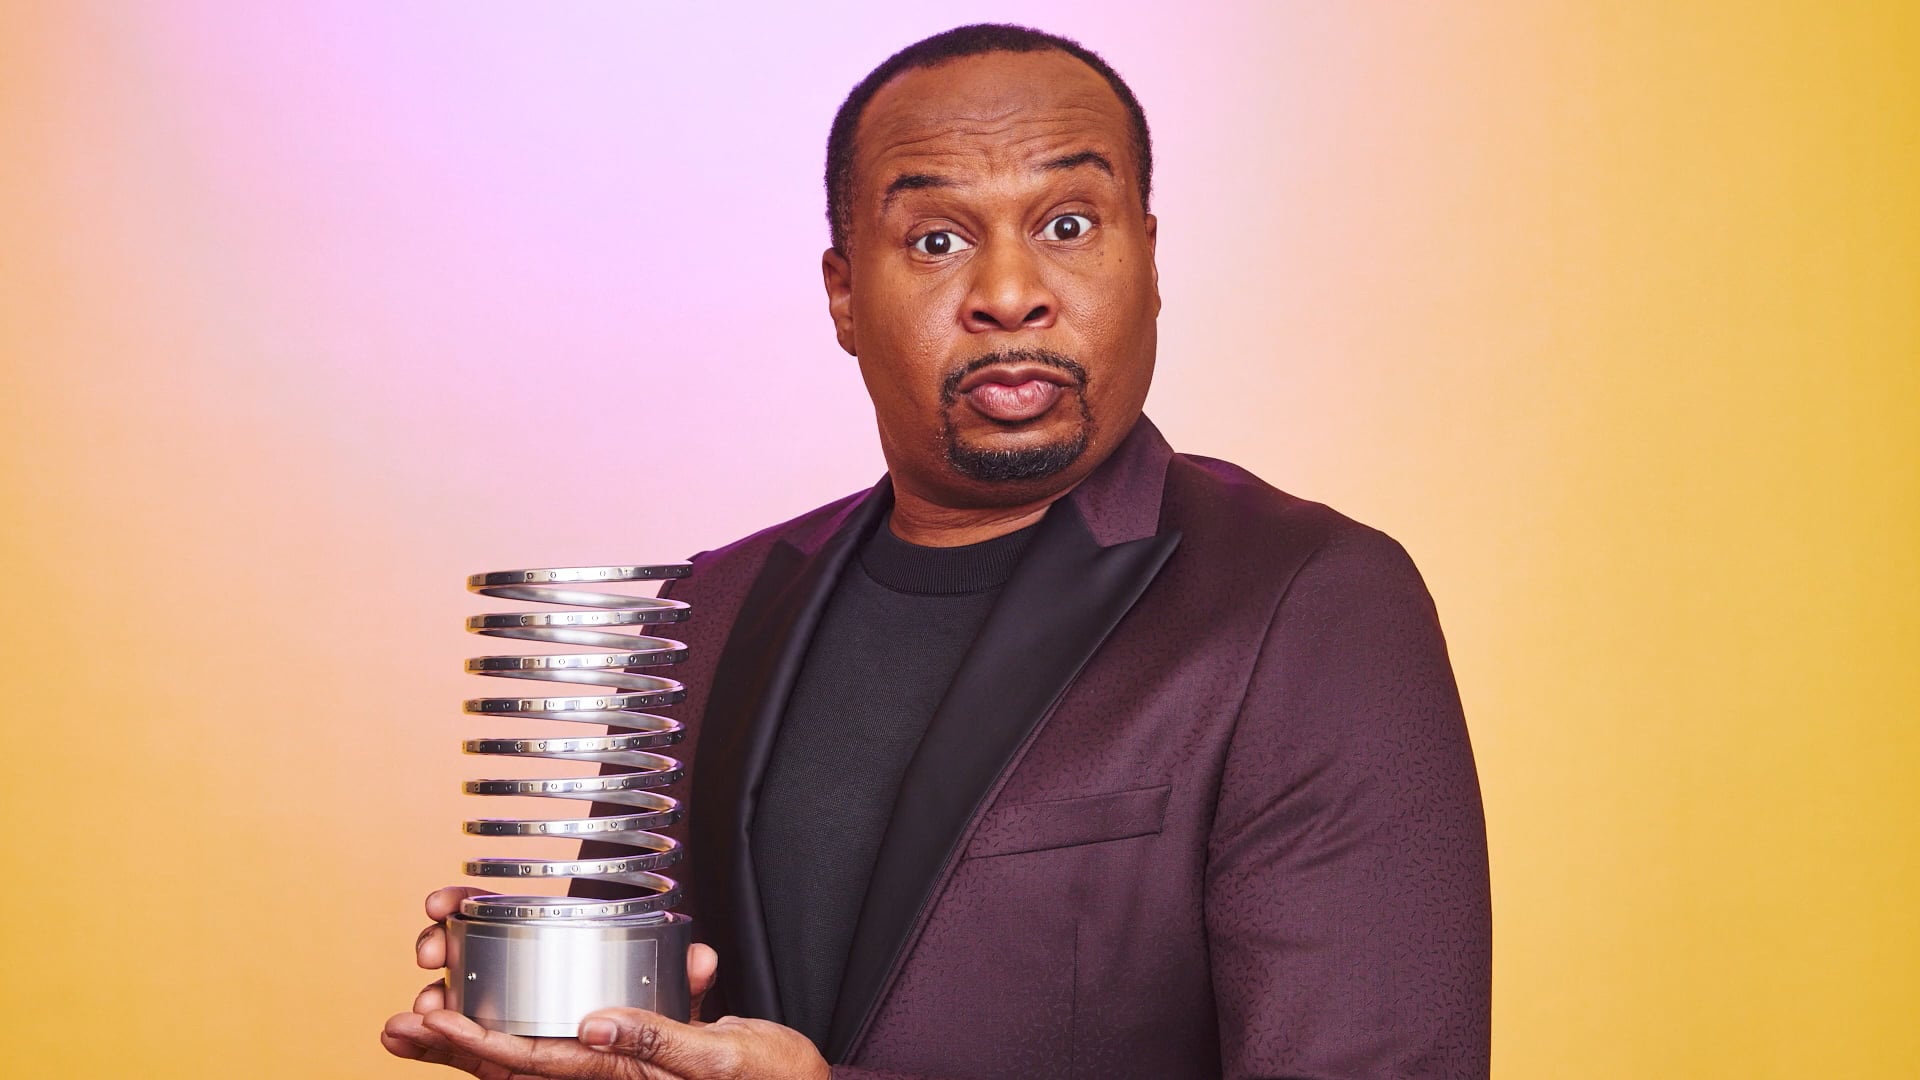 Comedian Roy Wood Jr. wearing a purple tuxedo jacket poses holding a Webby Award in front of a yellow background